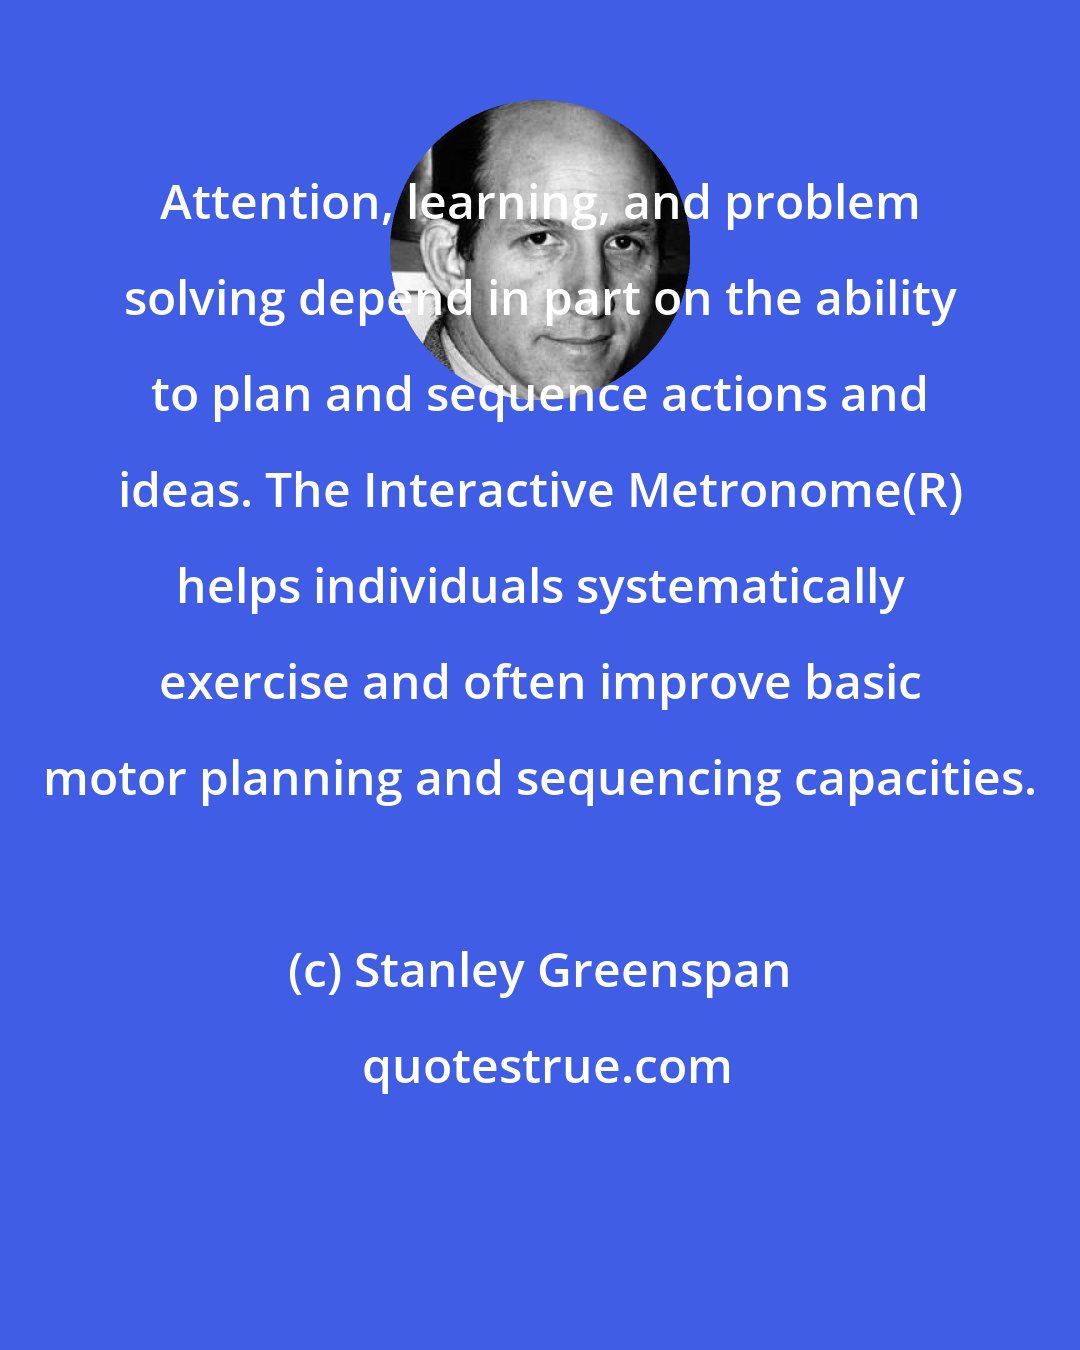 Stanley Greenspan: Attention, learning, and problem solving depend in part on the ability to plan and sequence actions and ideas. The Interactive Metronome(R) helps individuals systematically exercise and often improve basic motor planning and sequencing capacities.